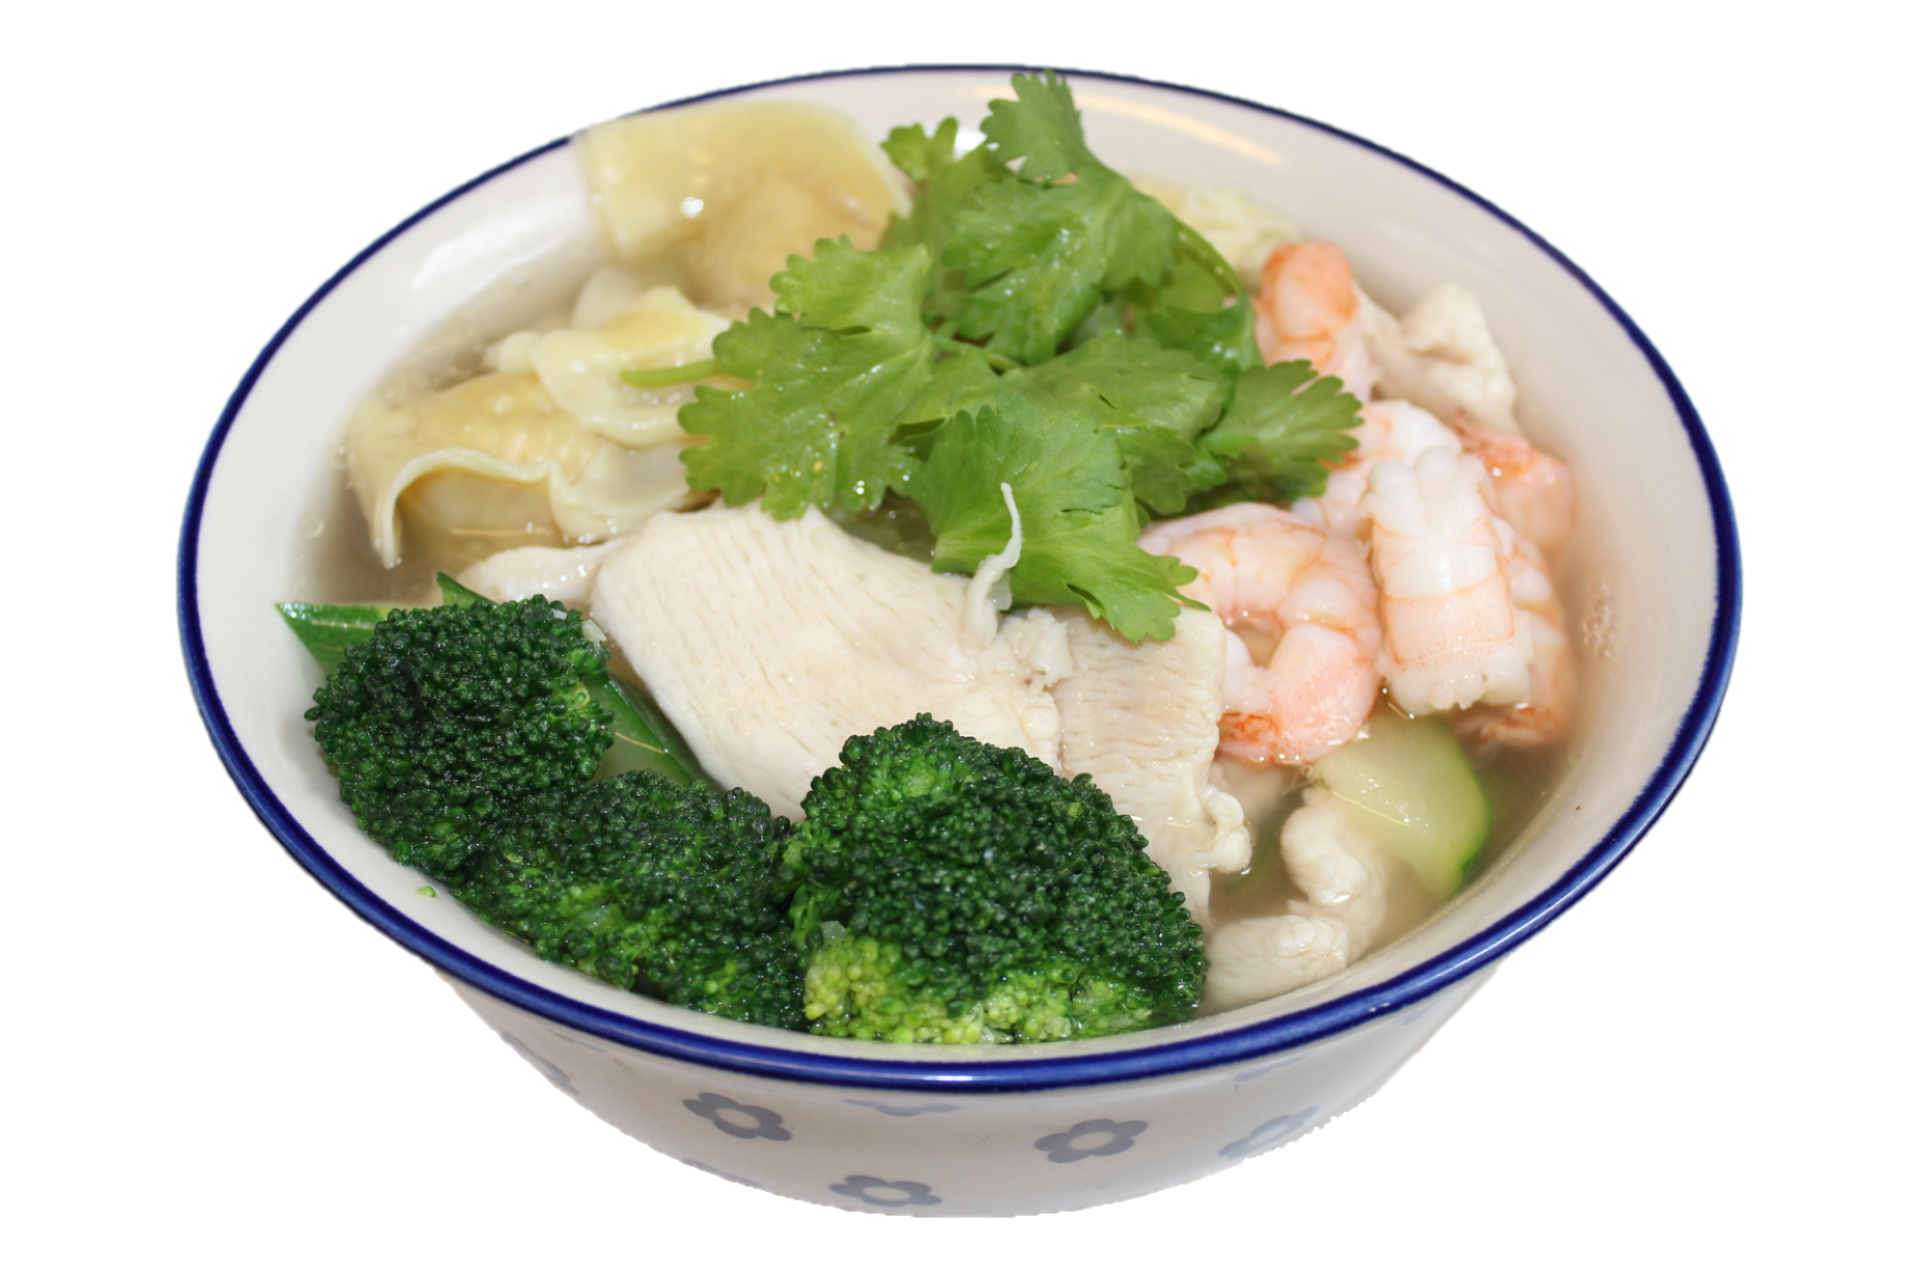 Number 122 on the Menu, Noodle Soup with Wonton, shrimps, chicken and vegetables